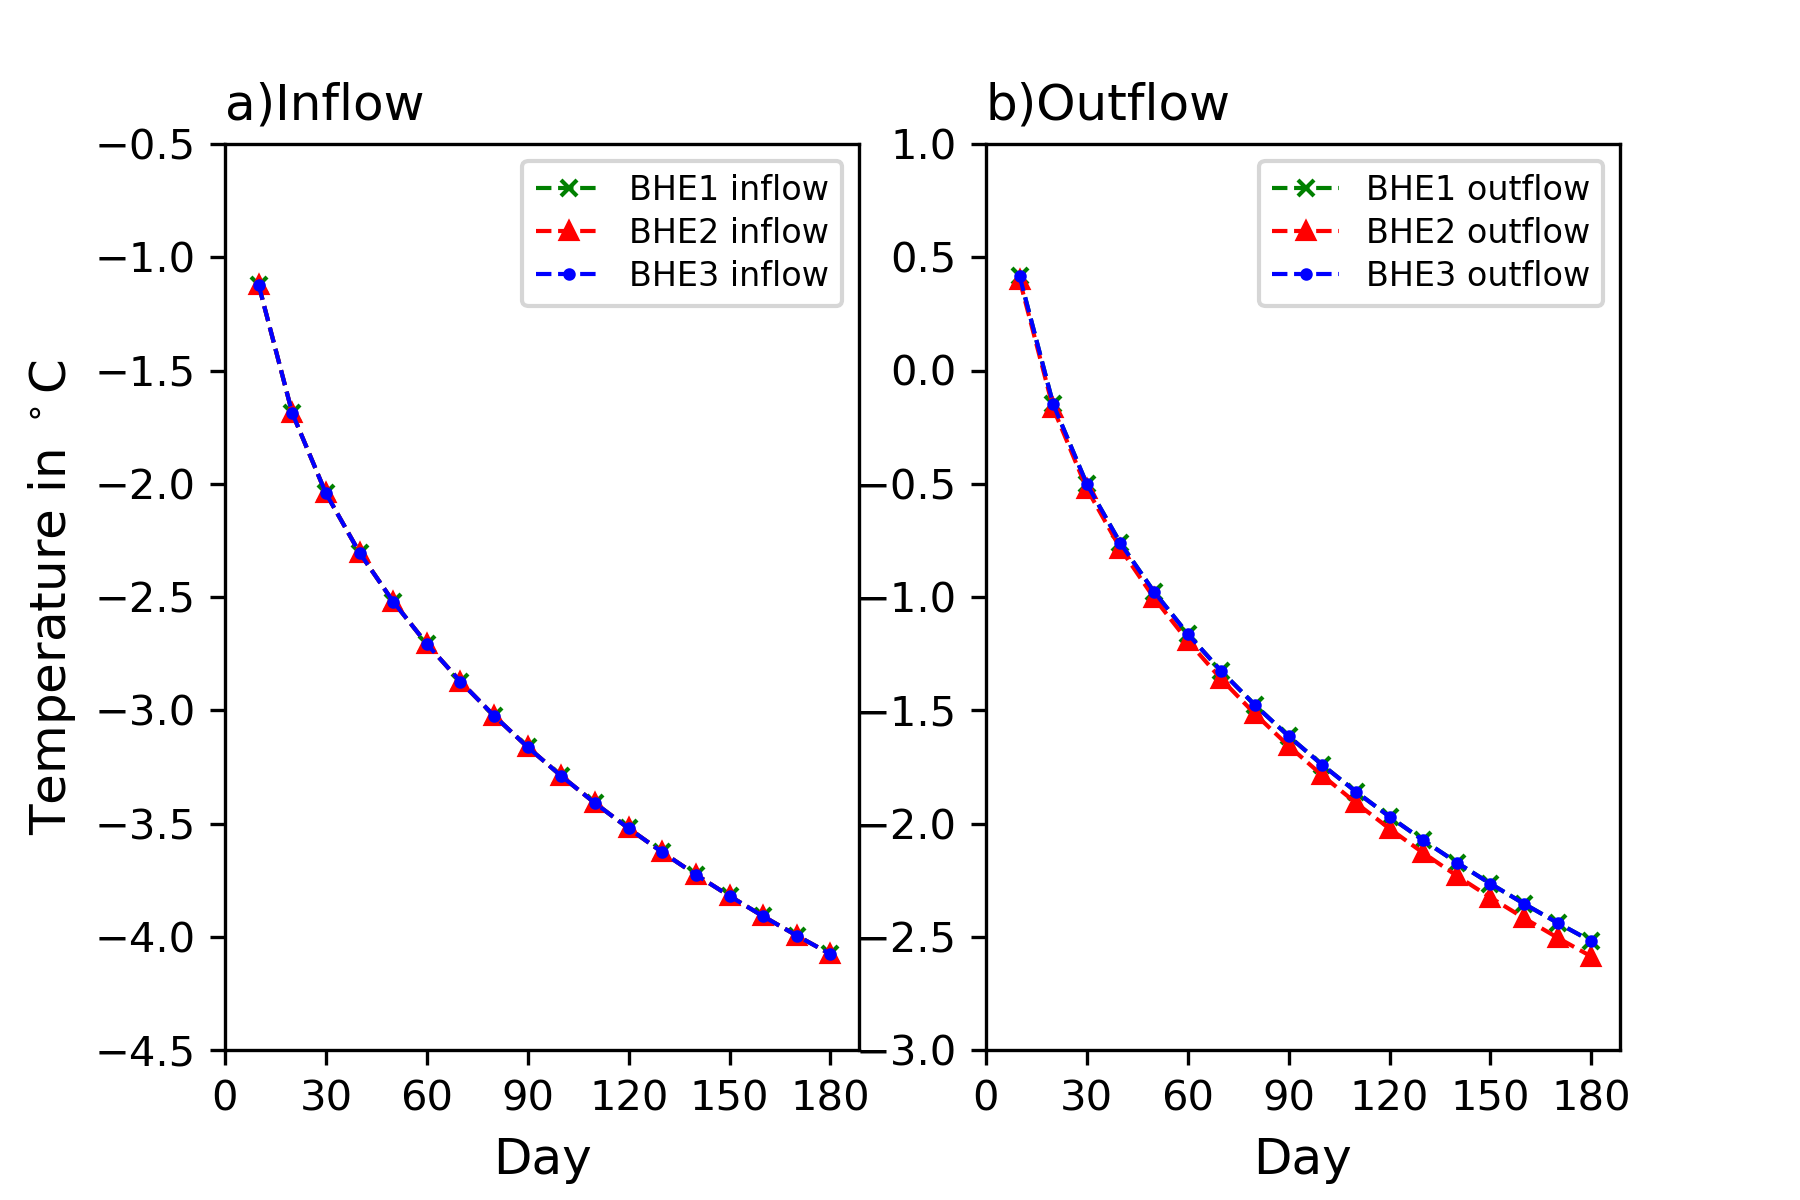 Evolution of the inflow and outflow refrigerant temperature of each BHE